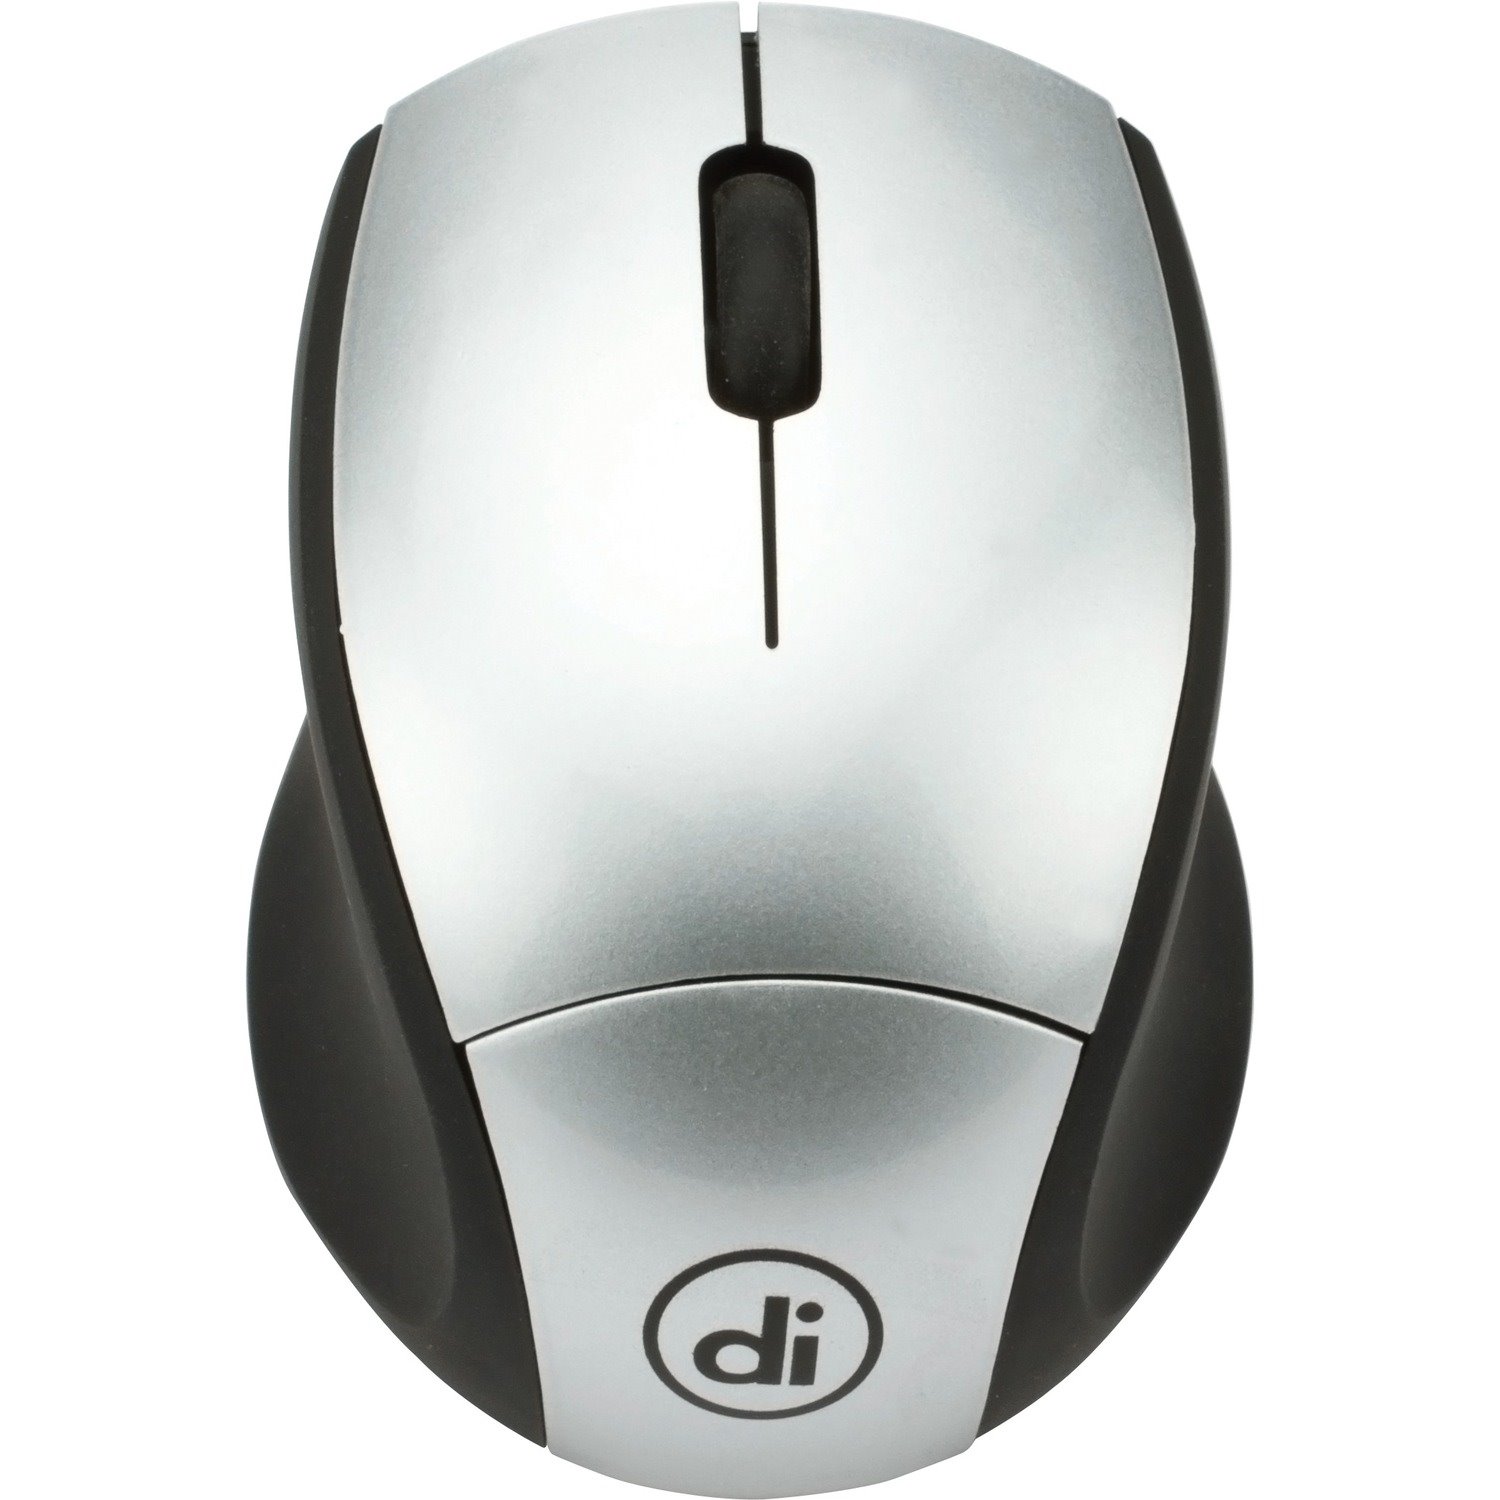 Digital Innovations EasyGlide Wireless 3-Button Travel Mouse